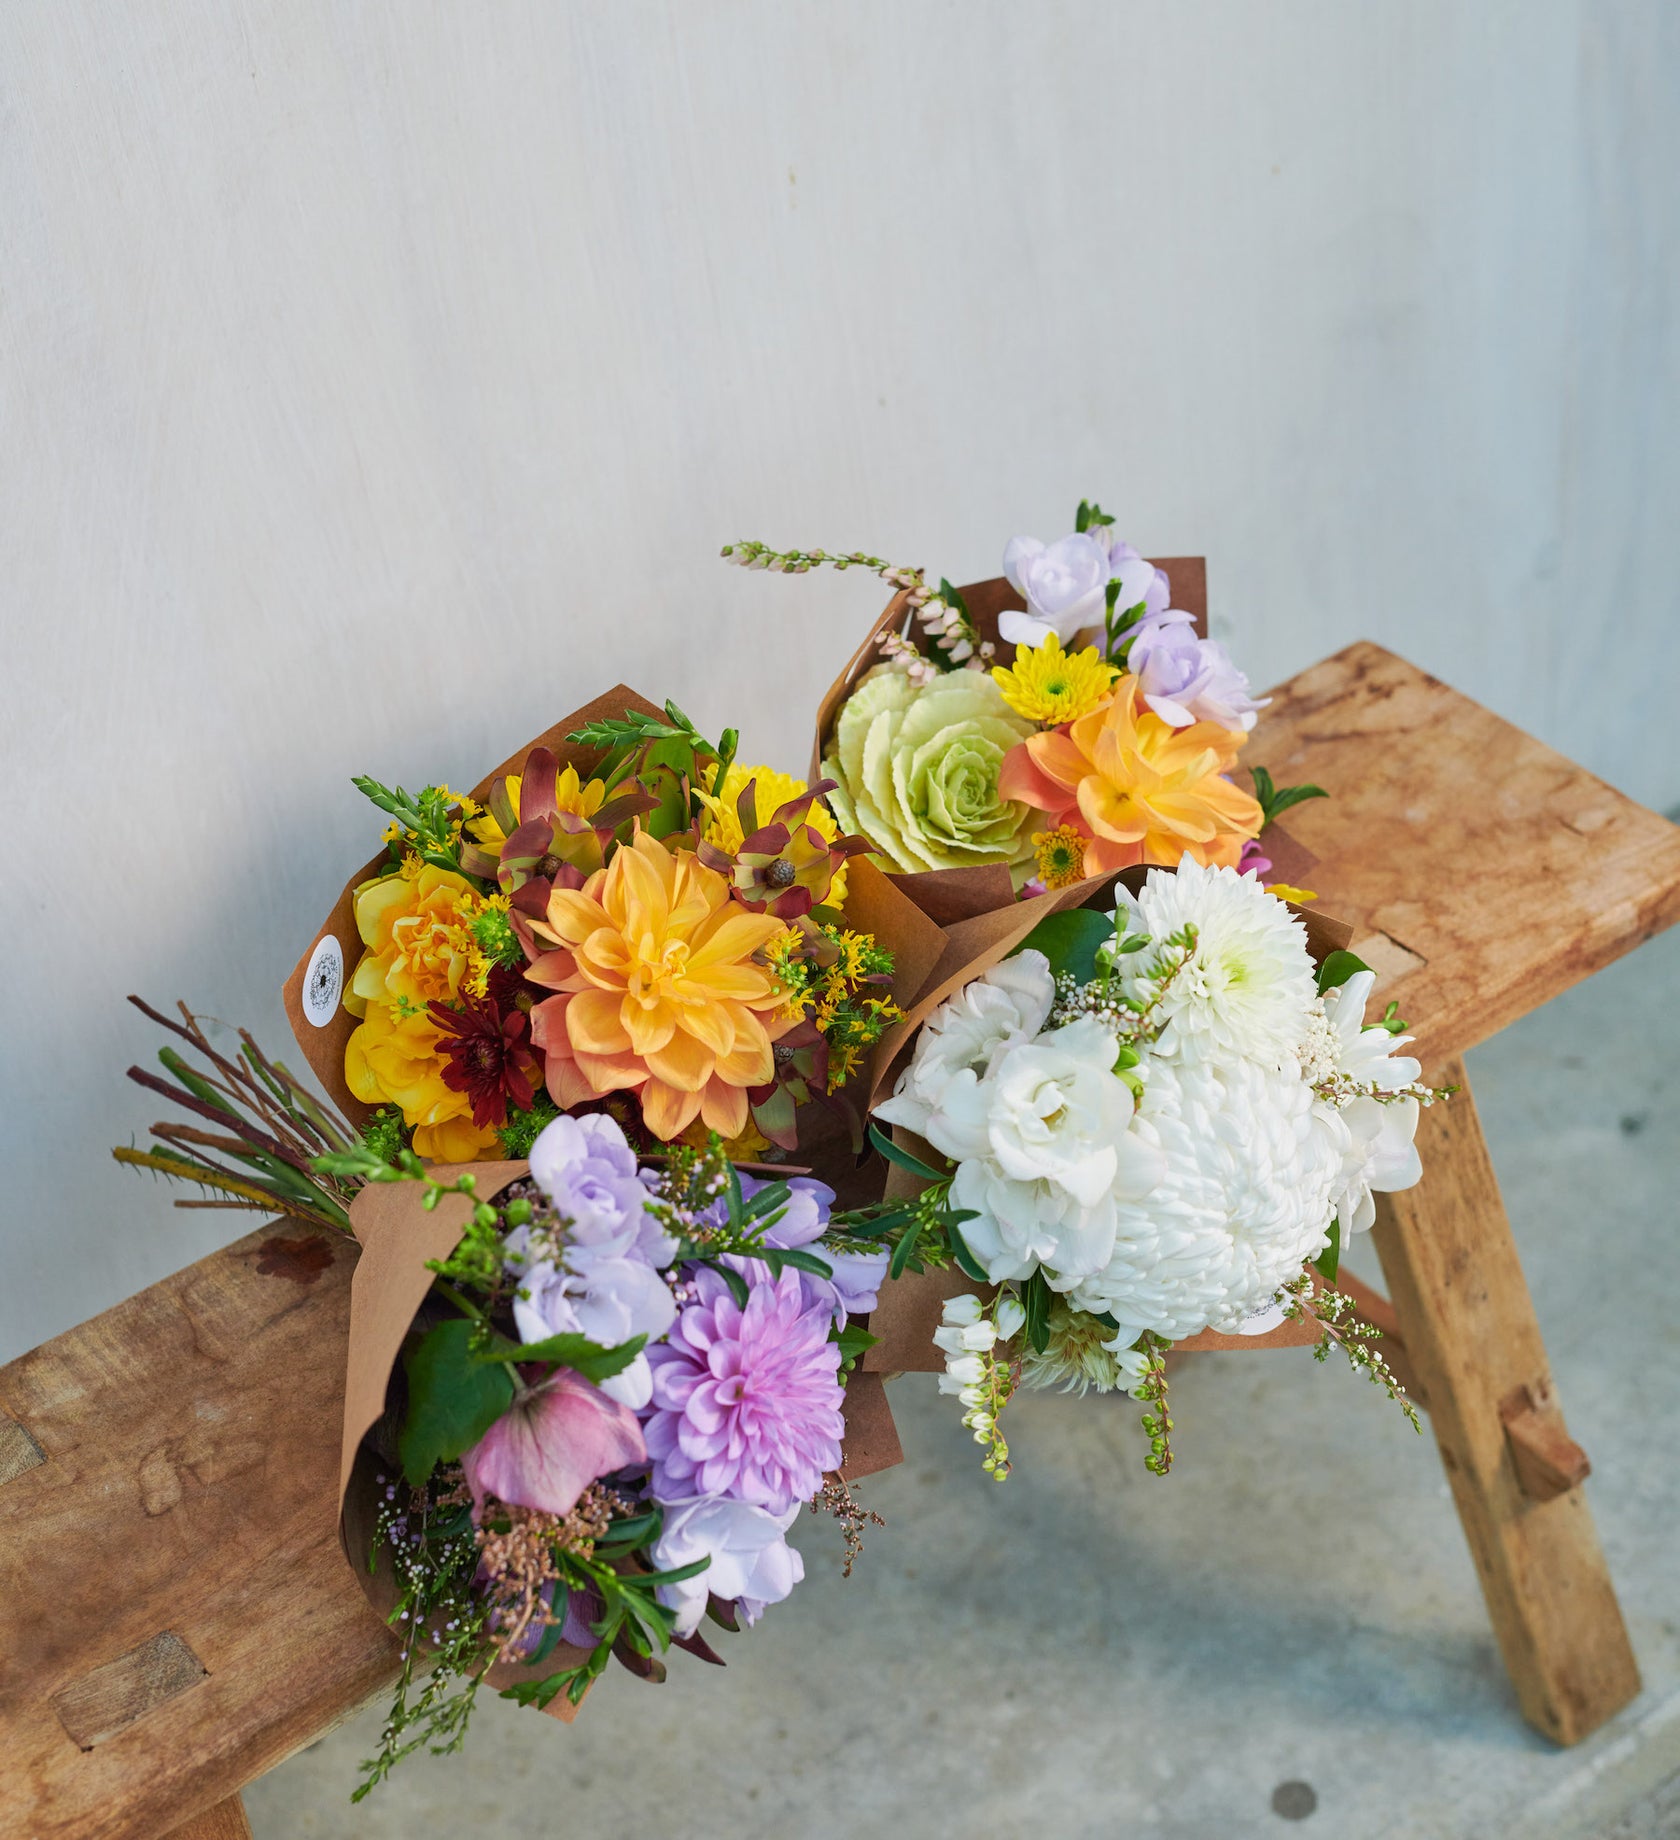 Four-bright-colourful-bouquets-bunched-on-wooden-stool